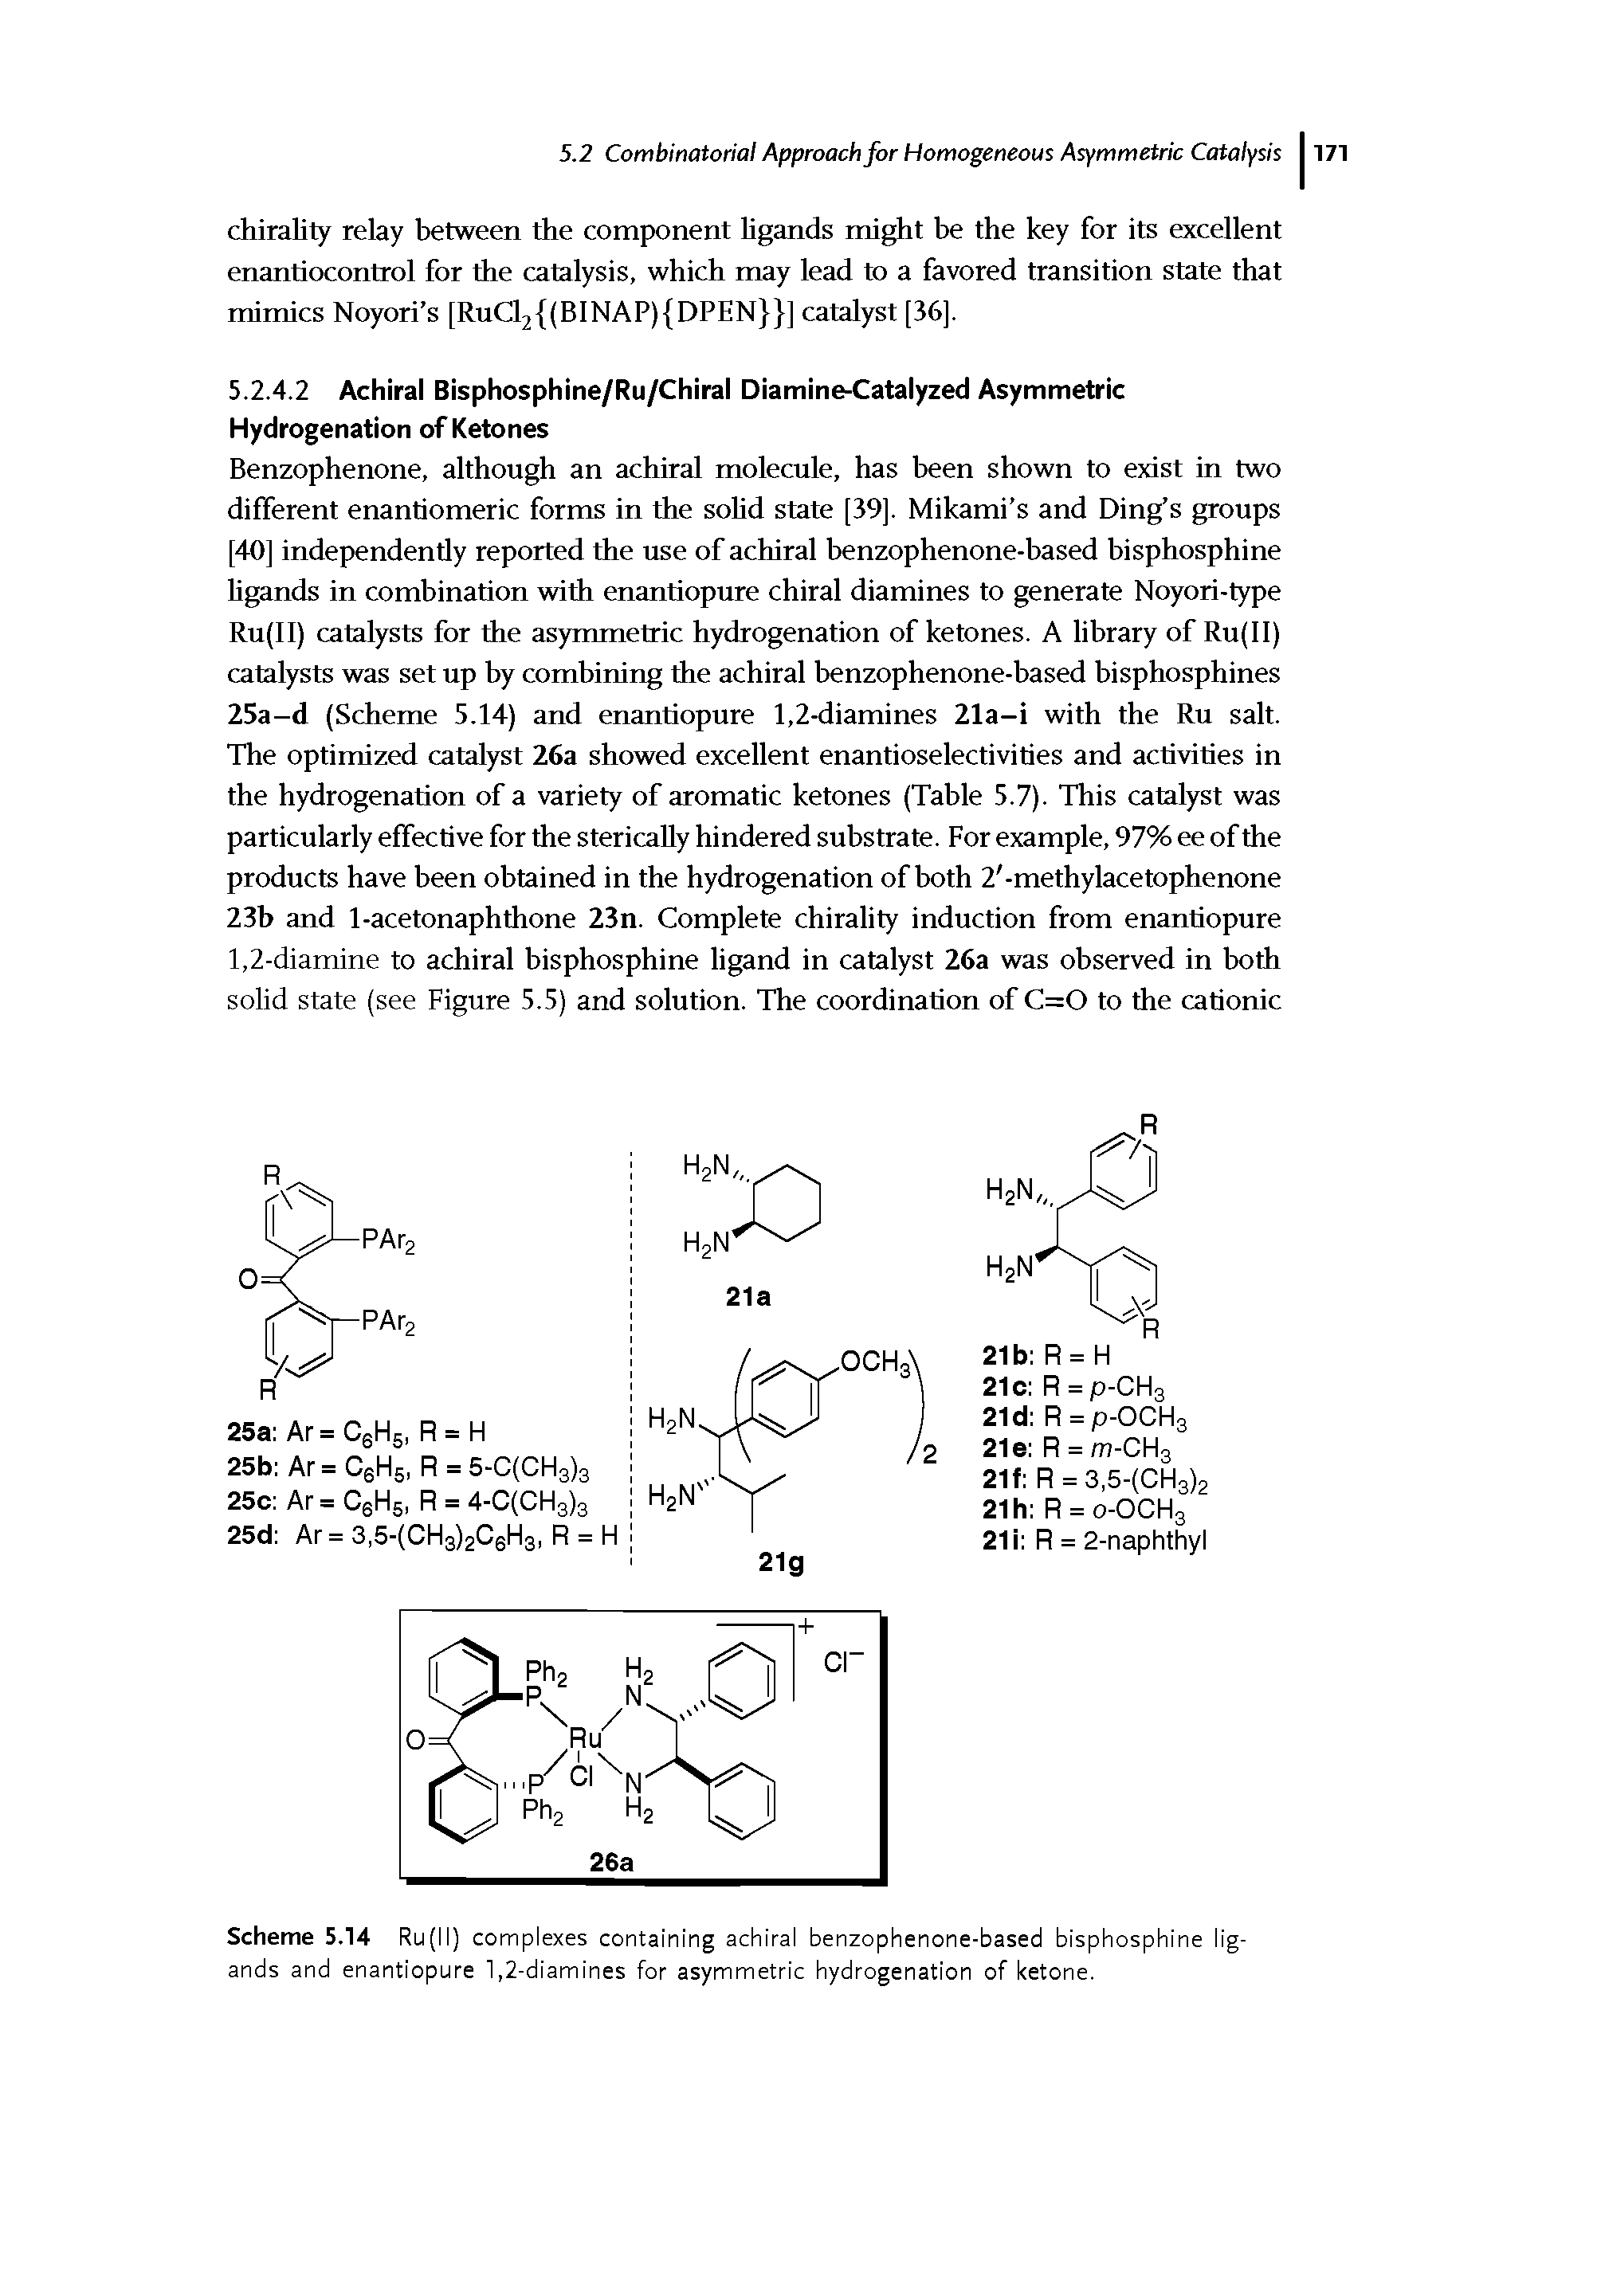 Scheme 5.14 Ru(ll) complexes containing achiral benzophenone-based bisphosphine ligands and enantiopure 1,2-diamines for asymmetric hydrogenation of ketone.